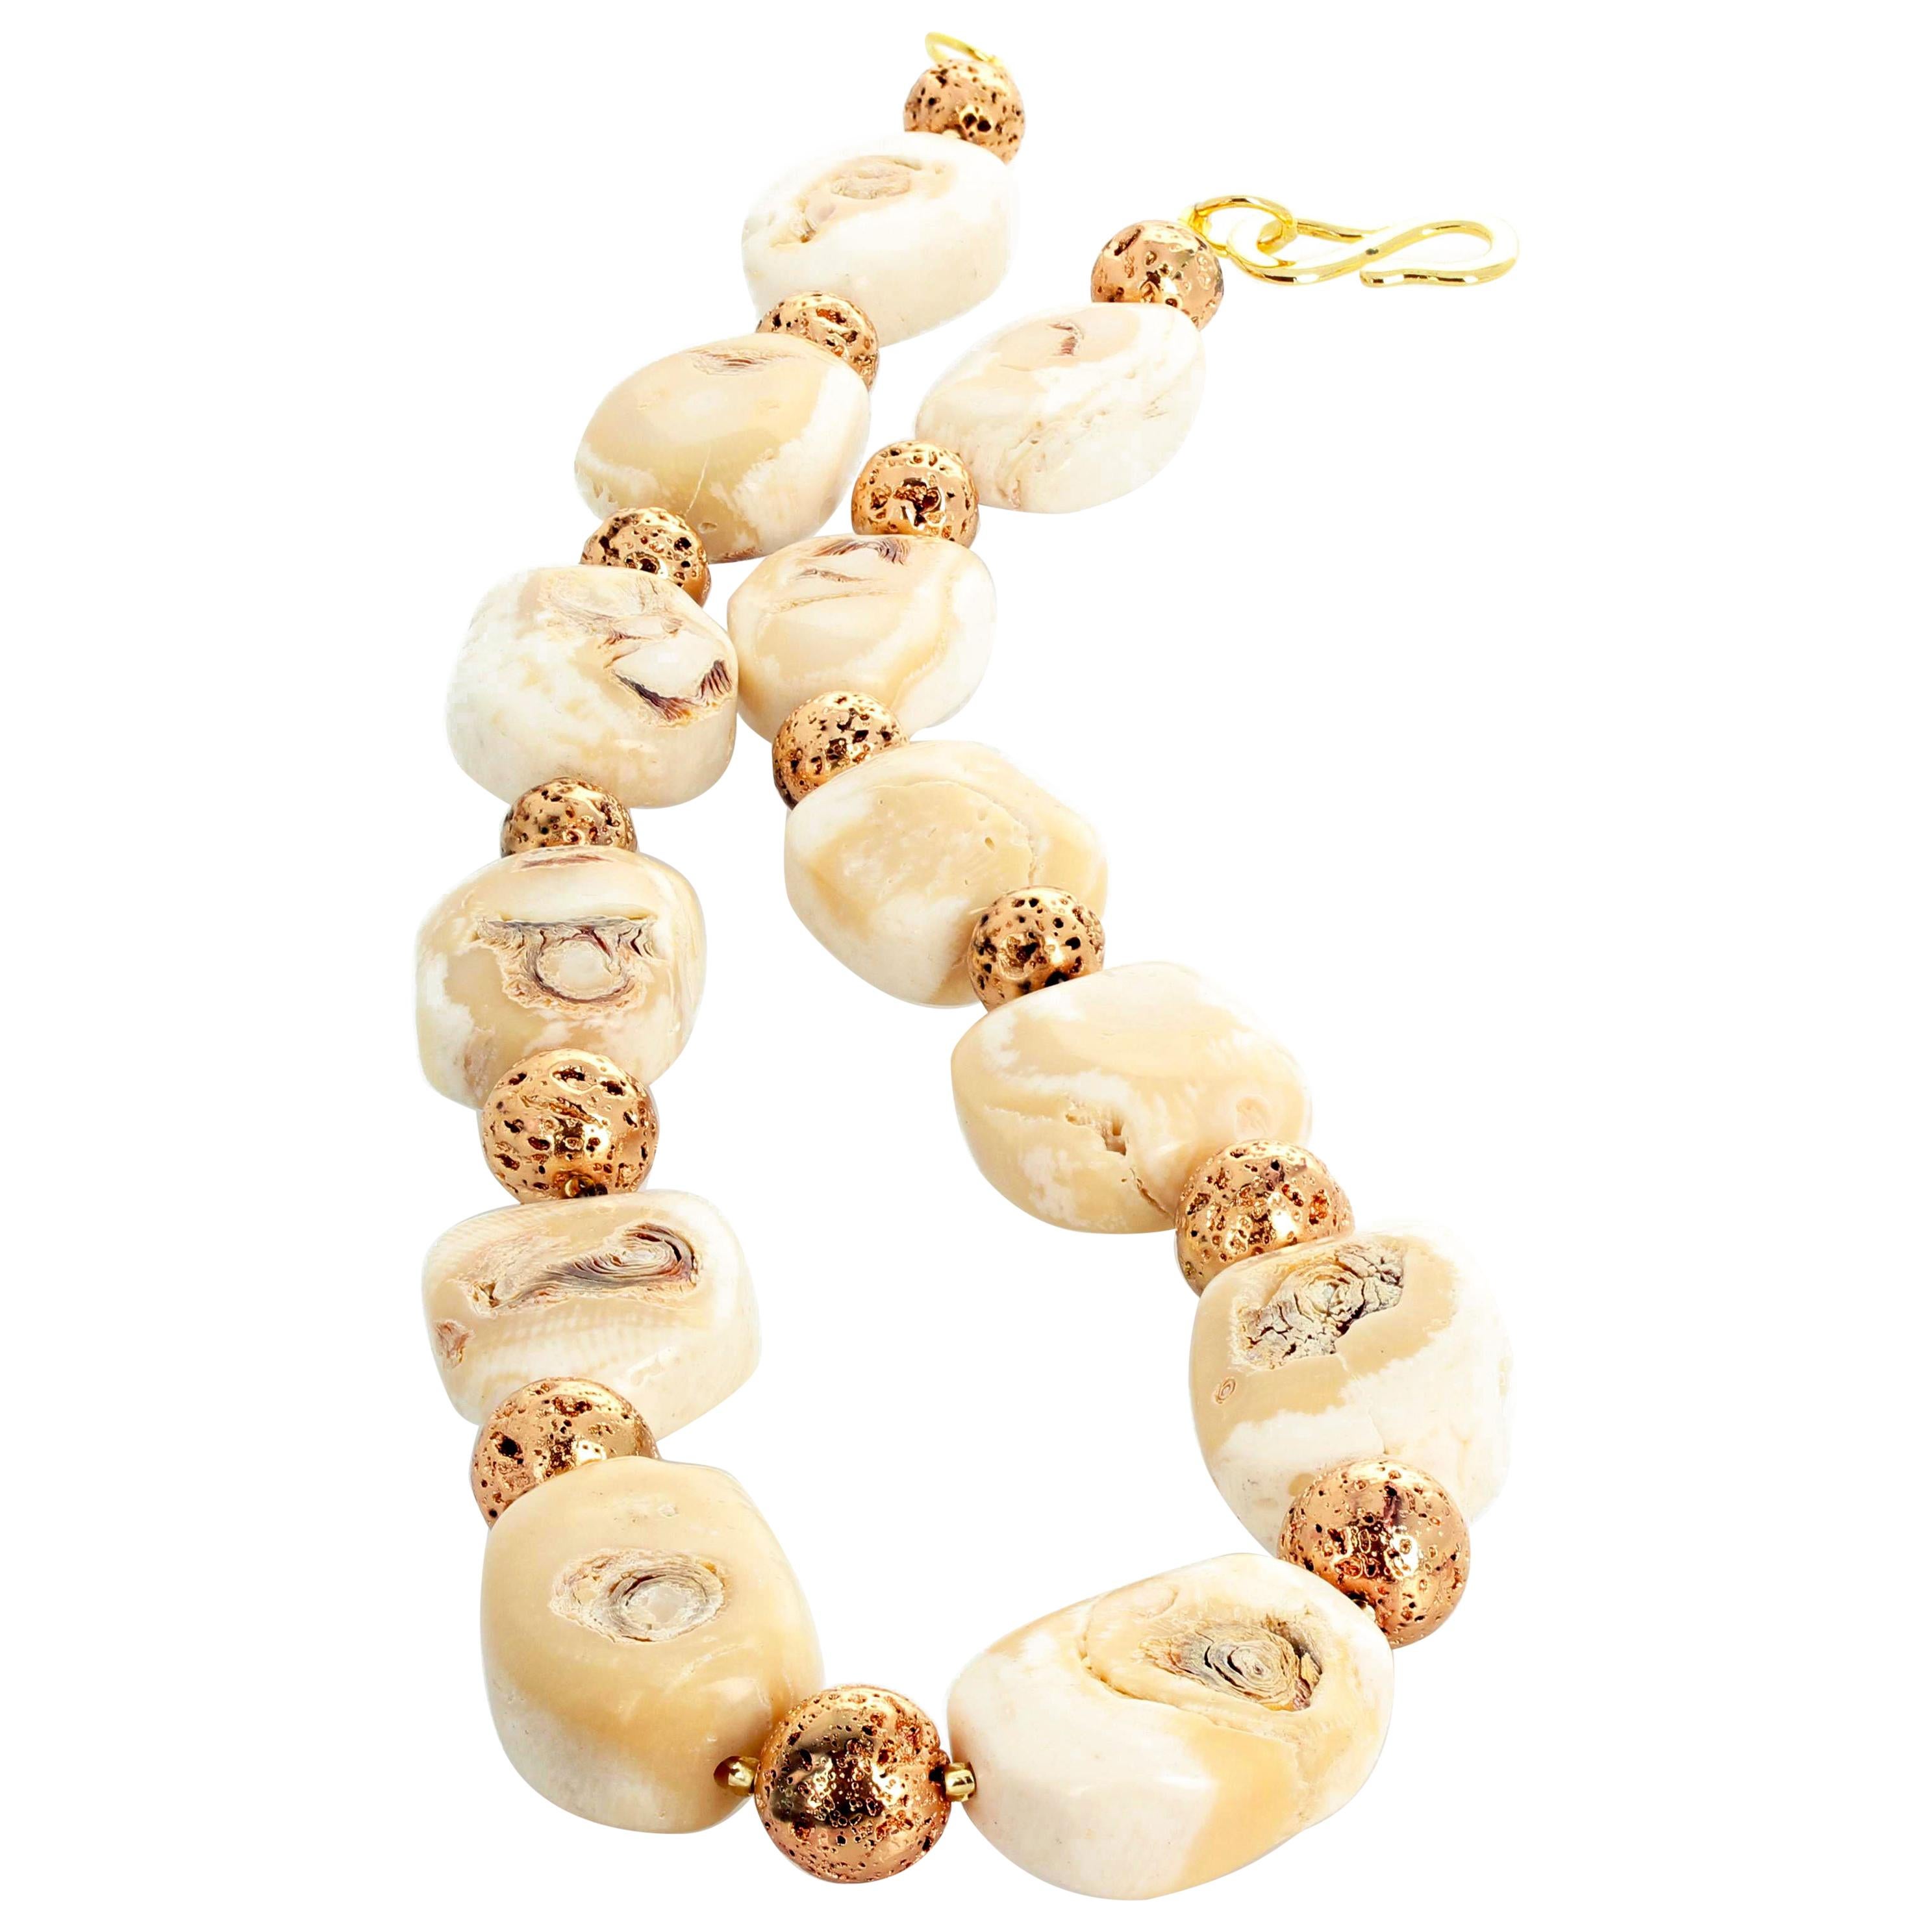 This damatically beautiful 21 inch long natural Beige Coral necklace is enhanced with gold plated round fascinating real Lava beads set with an easy to use gold plated hook clasp.  These real Corals are approximately 30 mm x 22 mm.  The largest